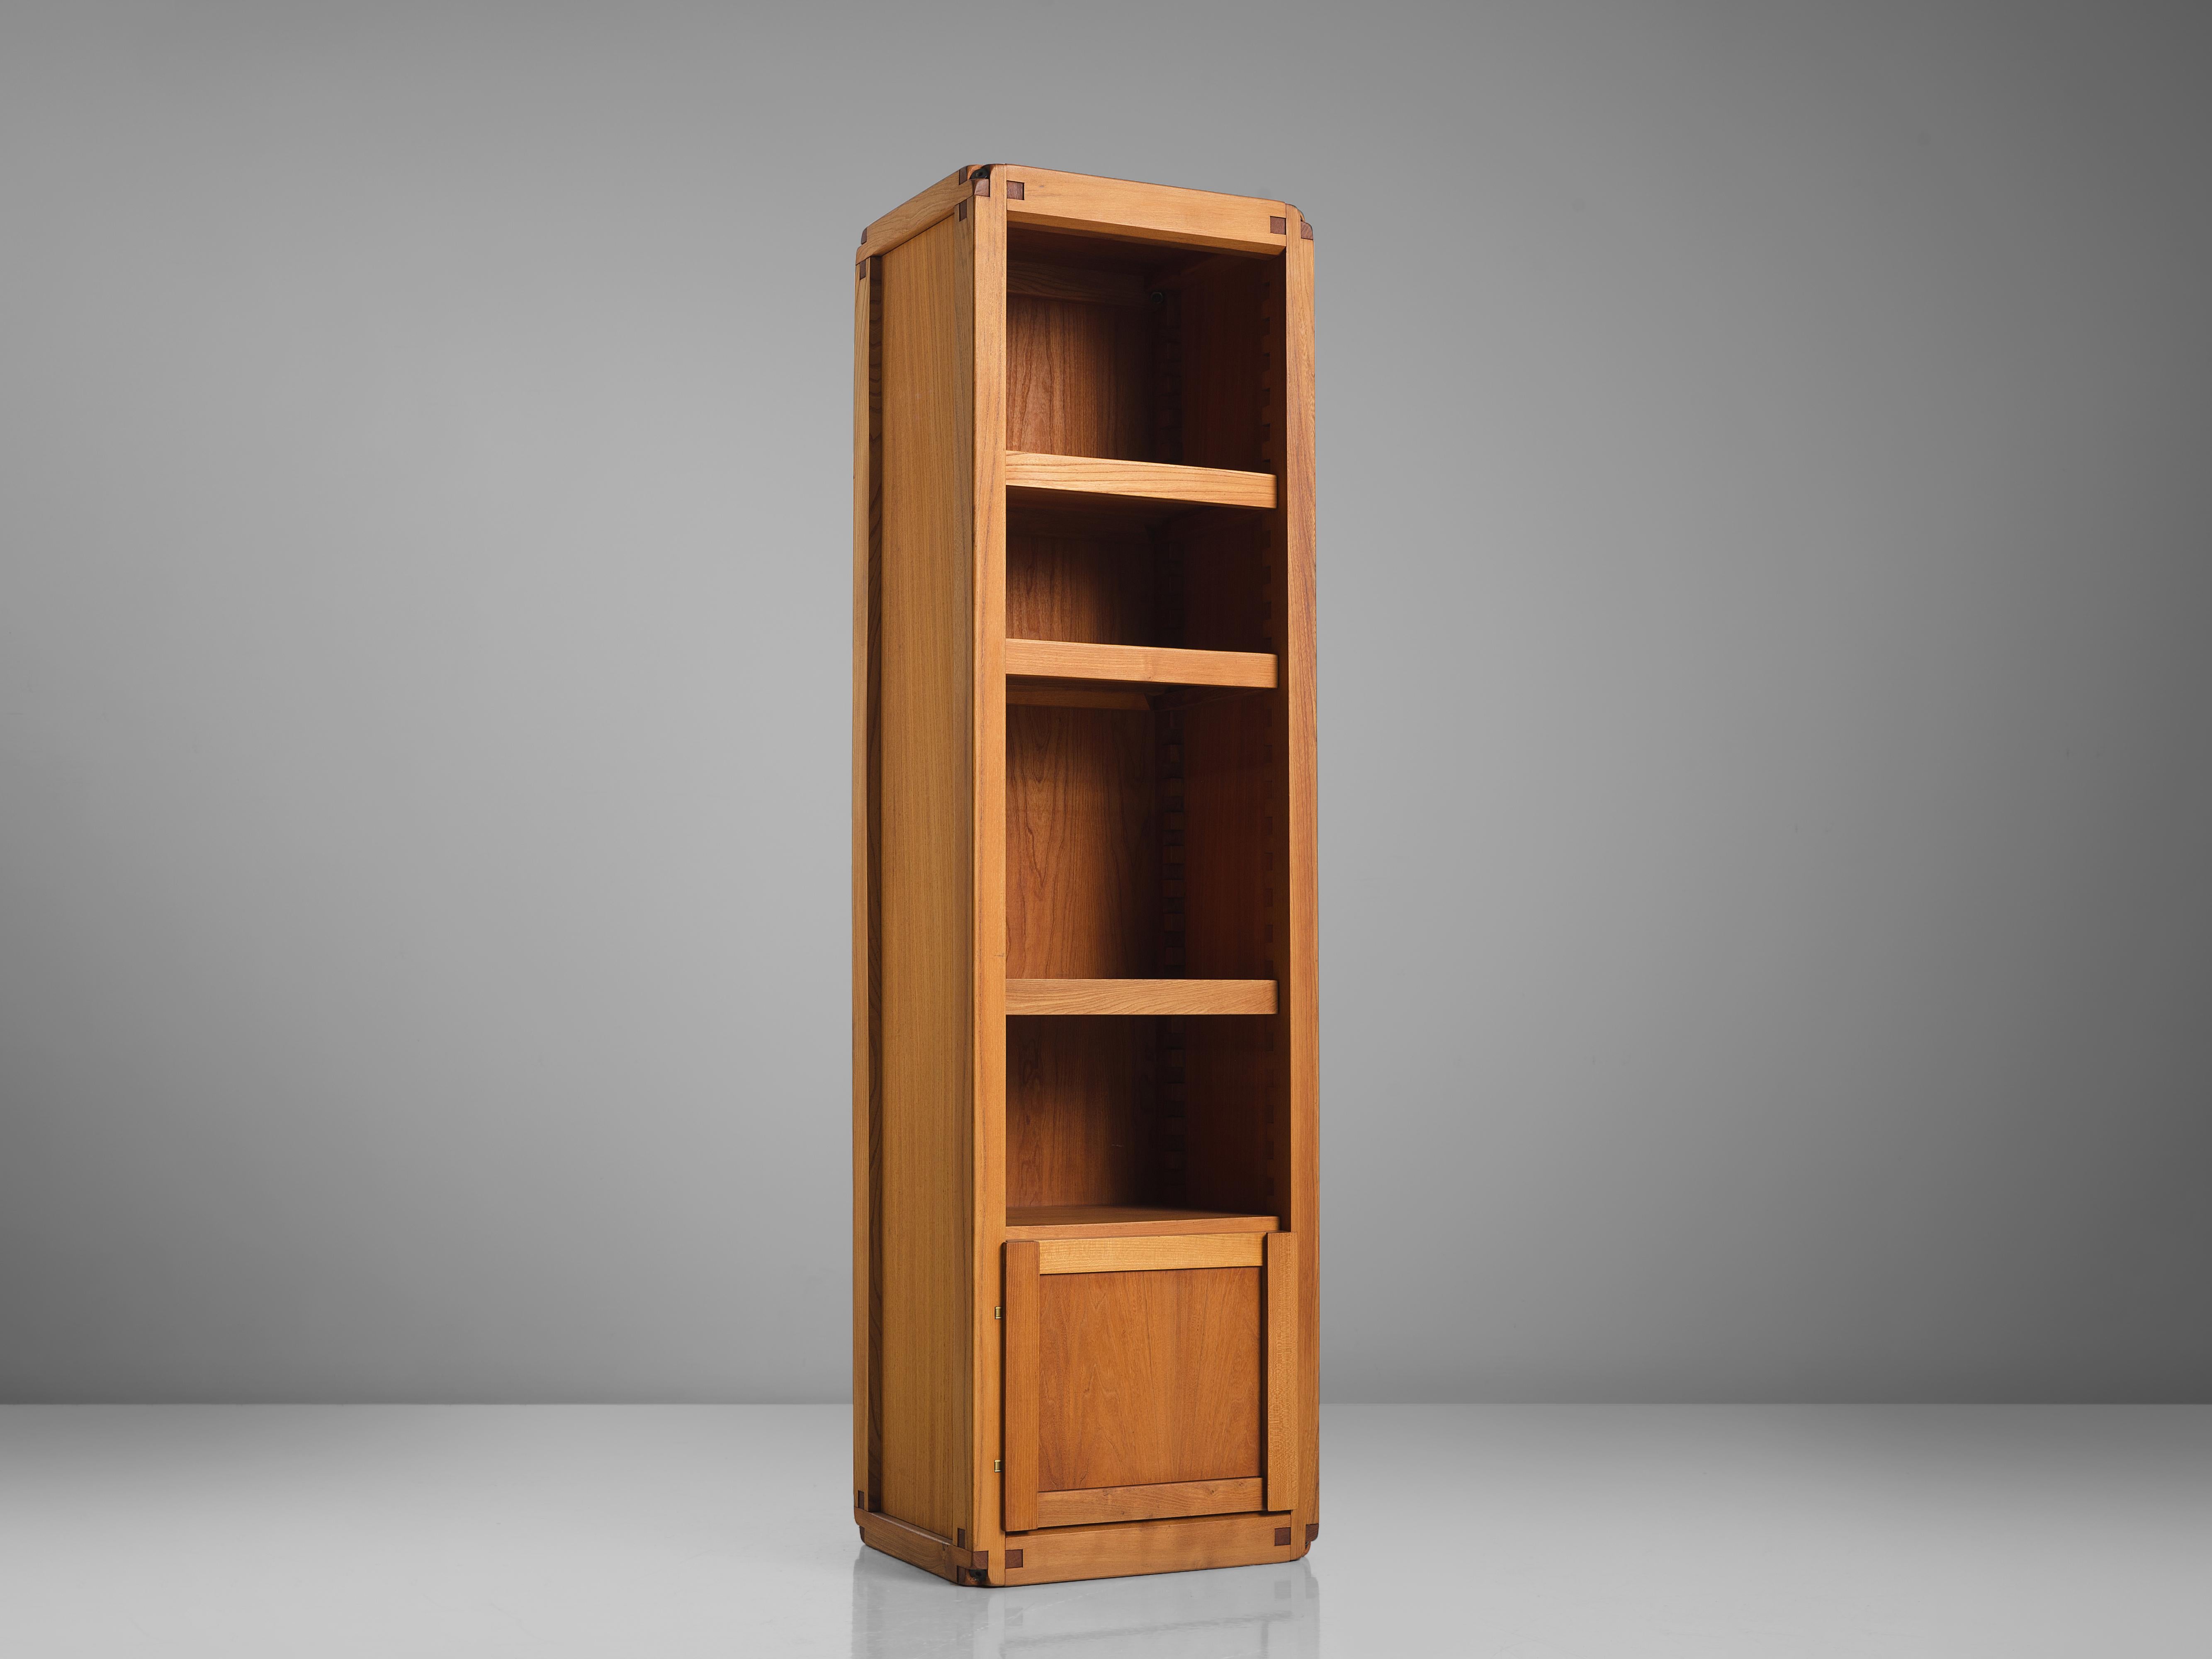 Pierre Chapo, cabinet B10, solid elm, France, 1960s

This bookcase or high cabinet is designed by the French designer Pierre Chapo and shows his trademark wood joints with decorative character. The cabinet features a closed part on the bottom. The